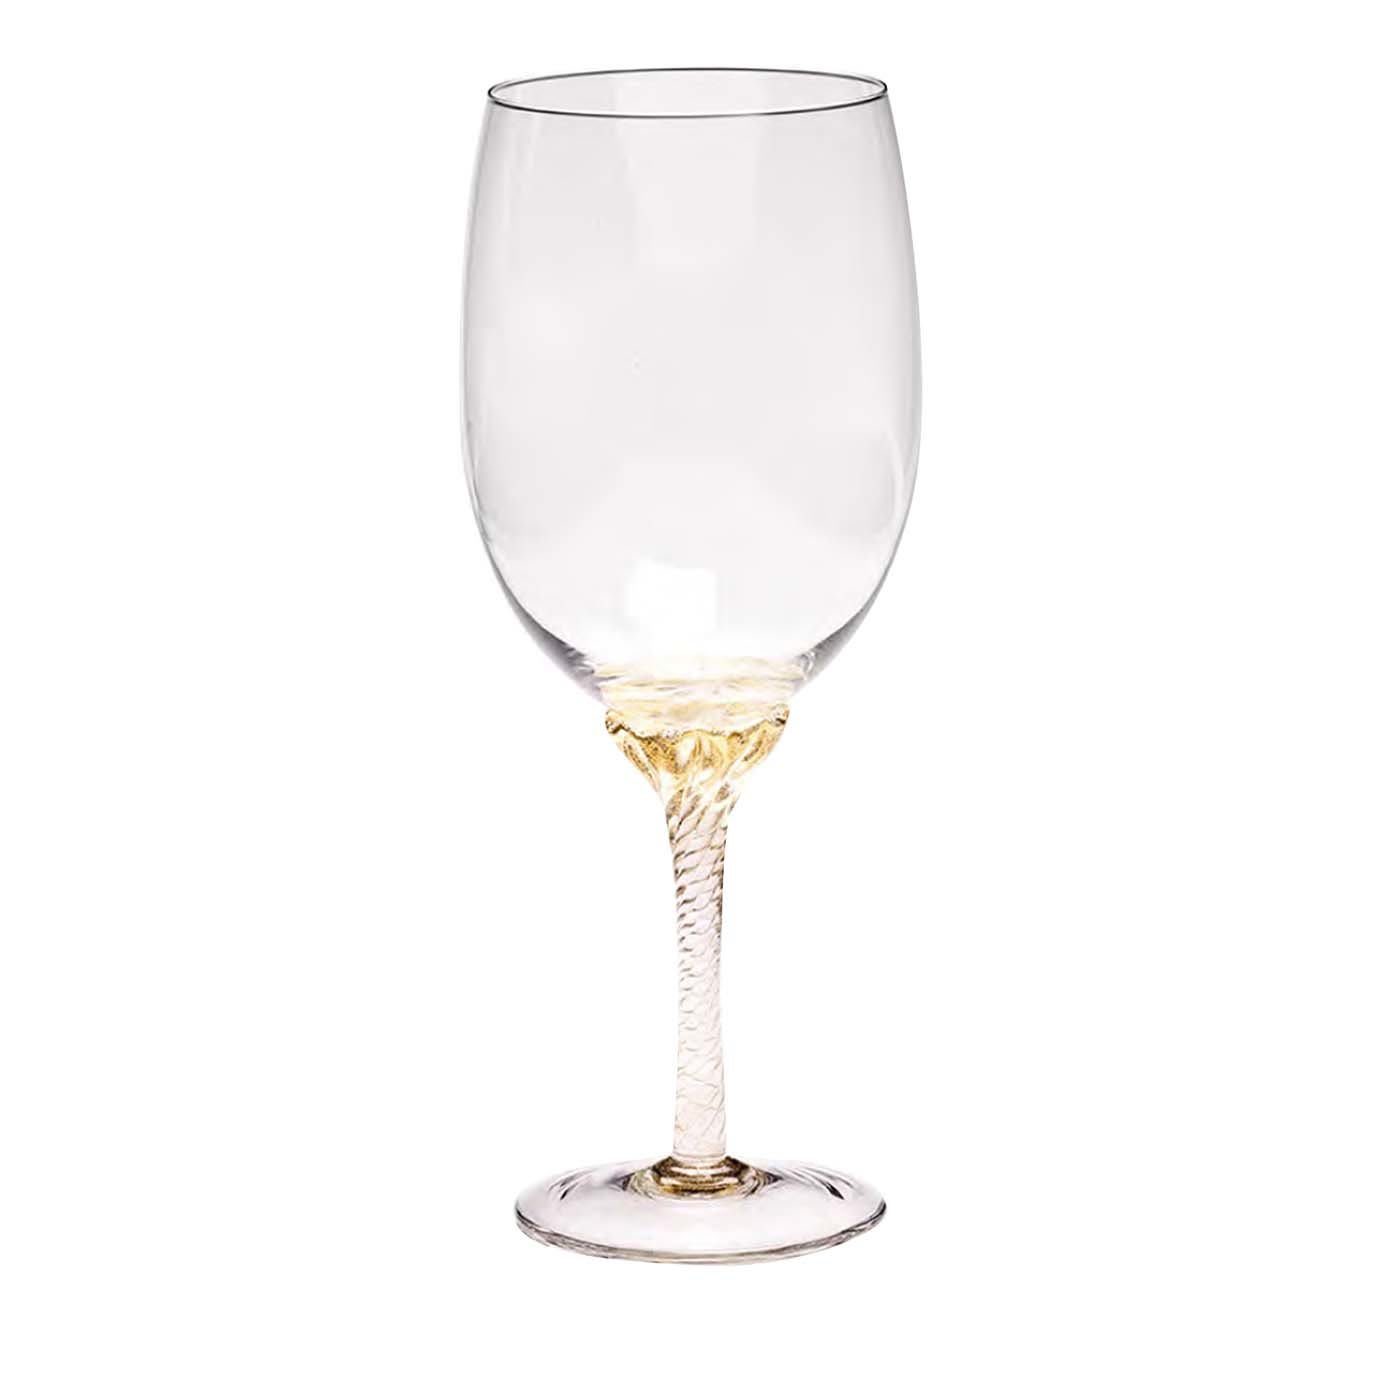 Artemisia Small Goblet in Murano Glass and Gold Leaf 24K - Mara Dal Cin for DFN